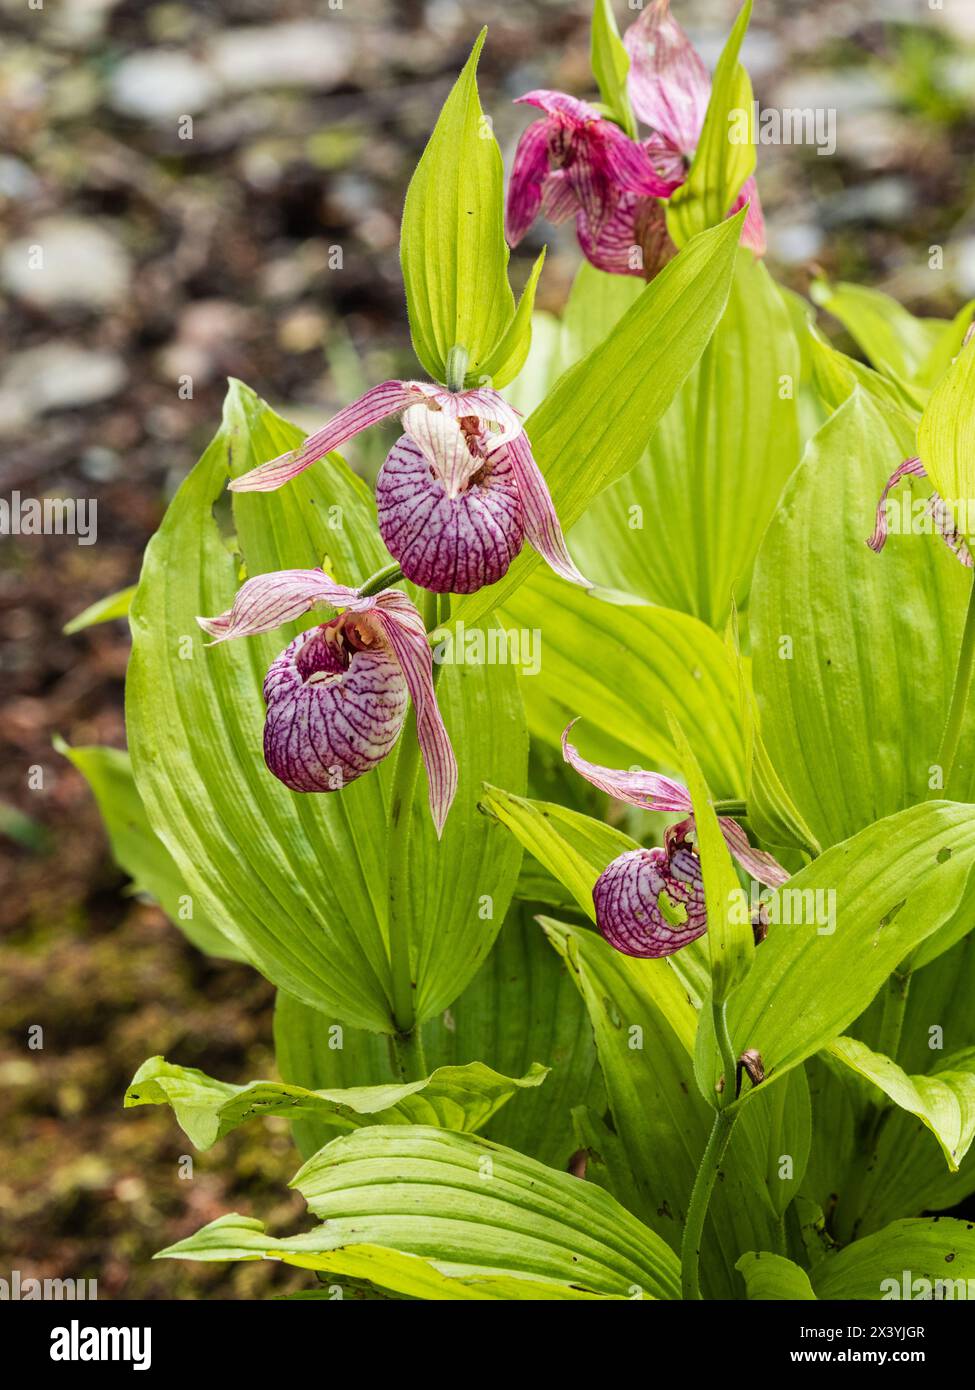 Pouched flowers of of the spring blooming hardy terrestrial slipper orchid, Cypripedium franchetii Stock Photo